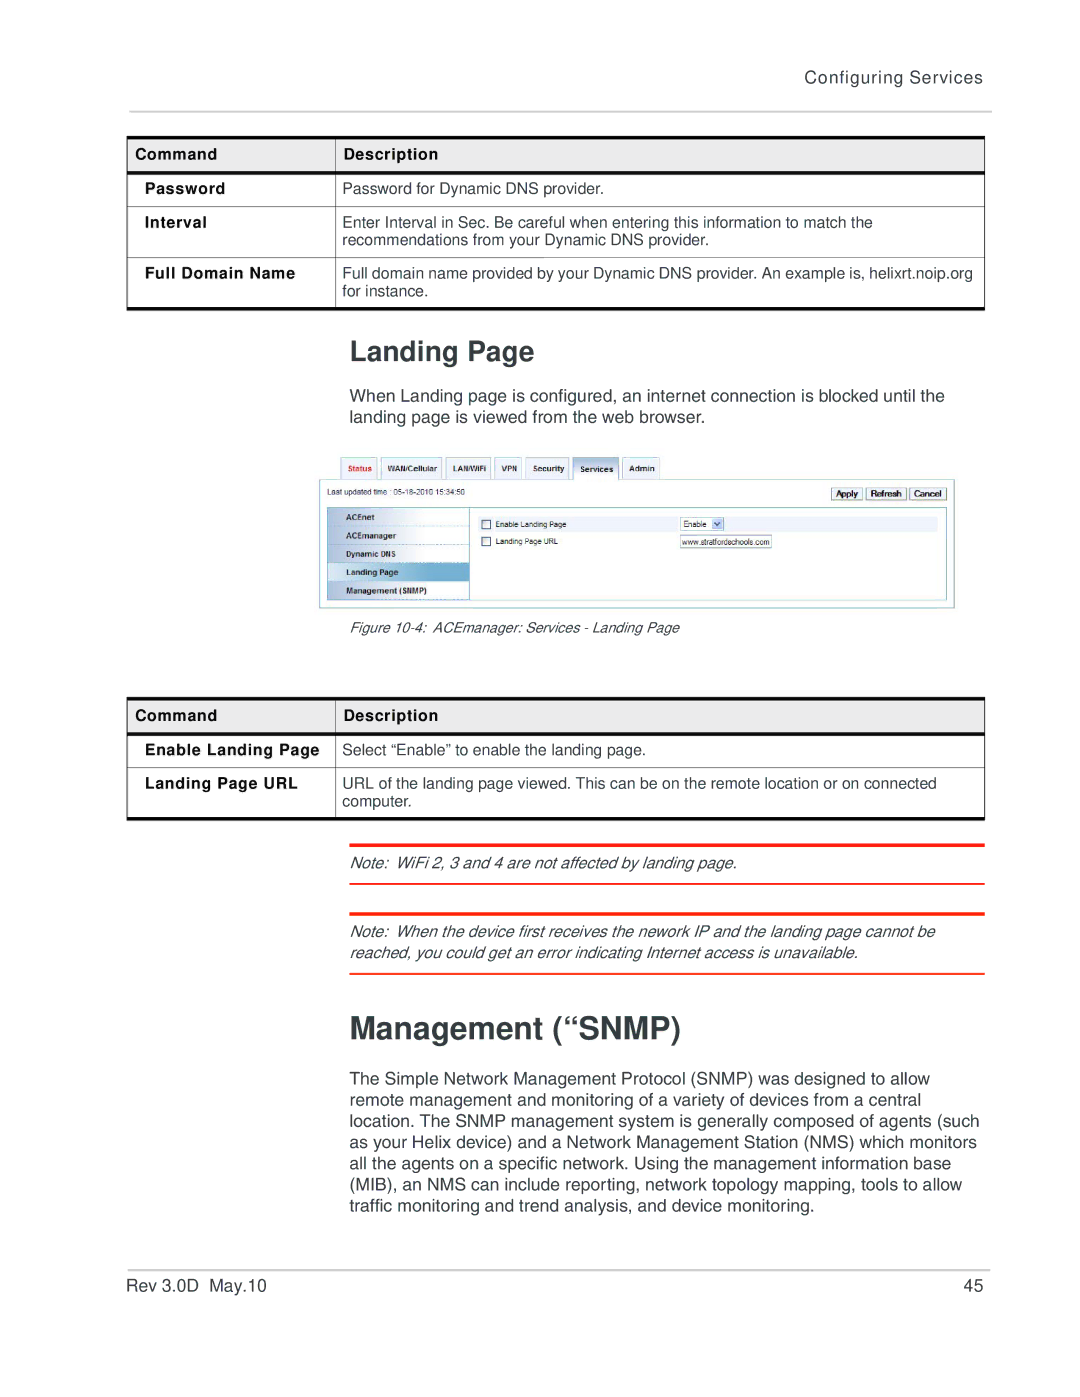 Sony 2140847 manual Management Snmp, Landing 